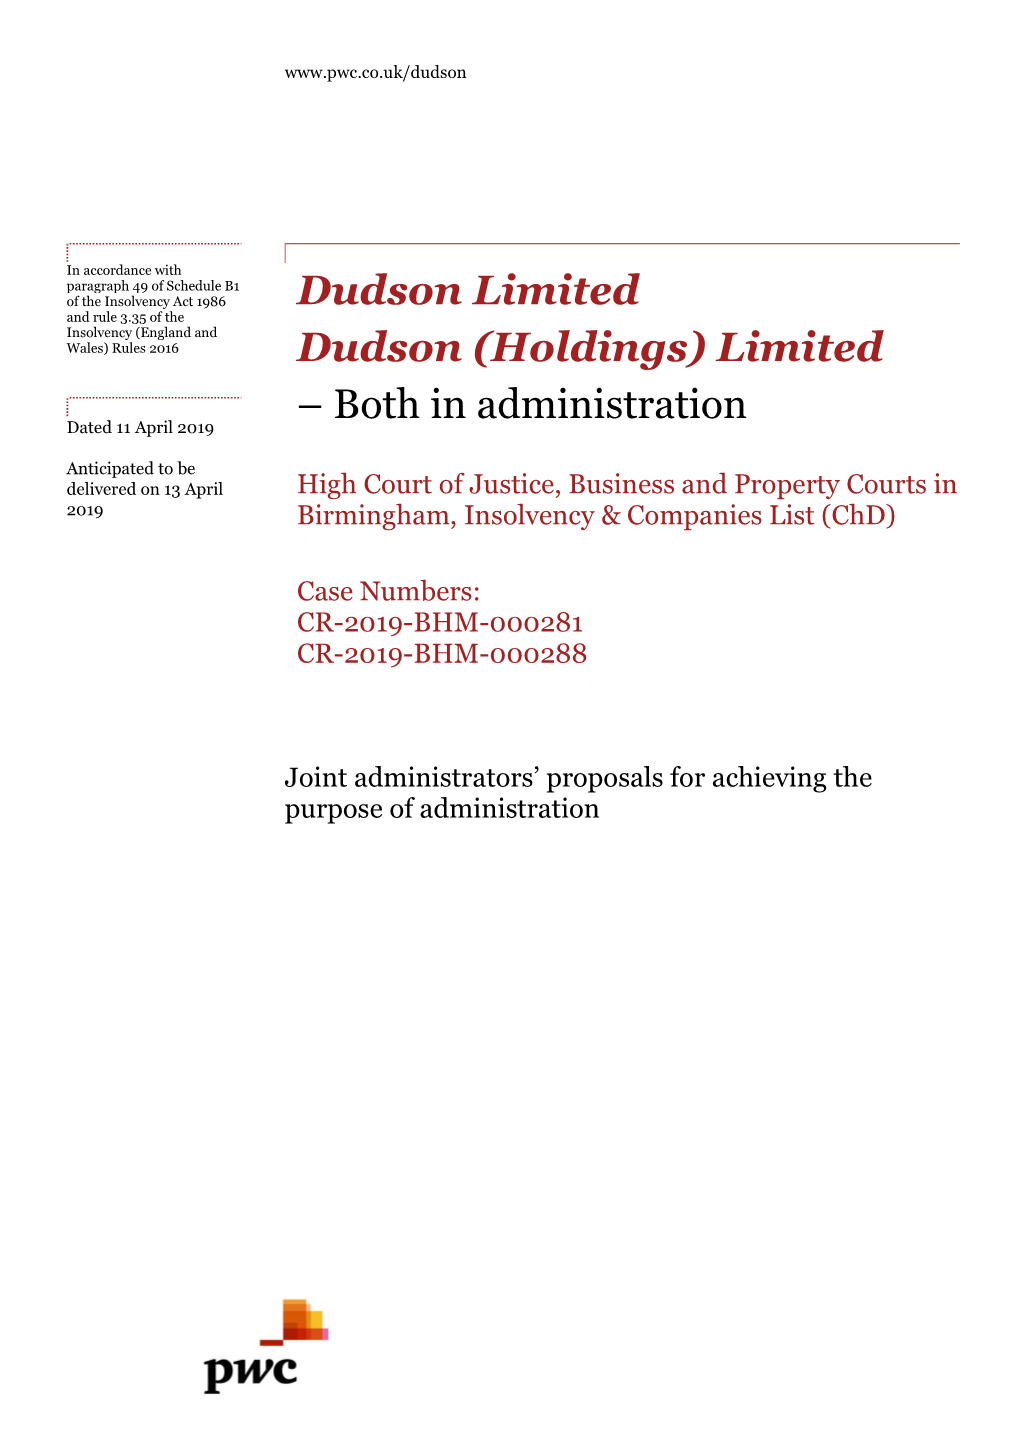 Dudson Limited Dudson (Holdings) Limited – Both in Administration